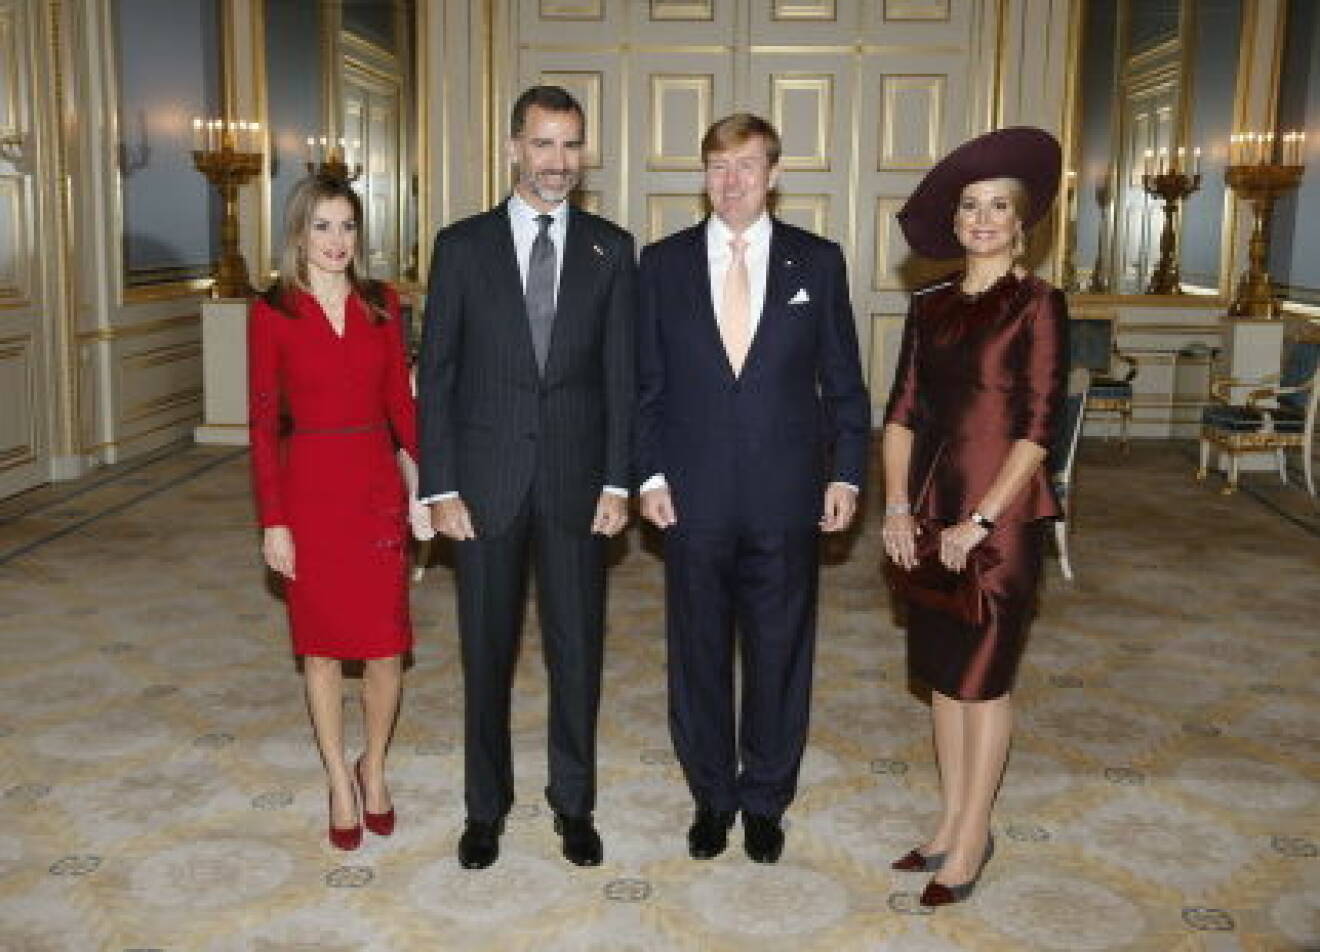 King Felipe VI and Queen Letizia received by Dutch King Willem Alexander and Queen Maxima